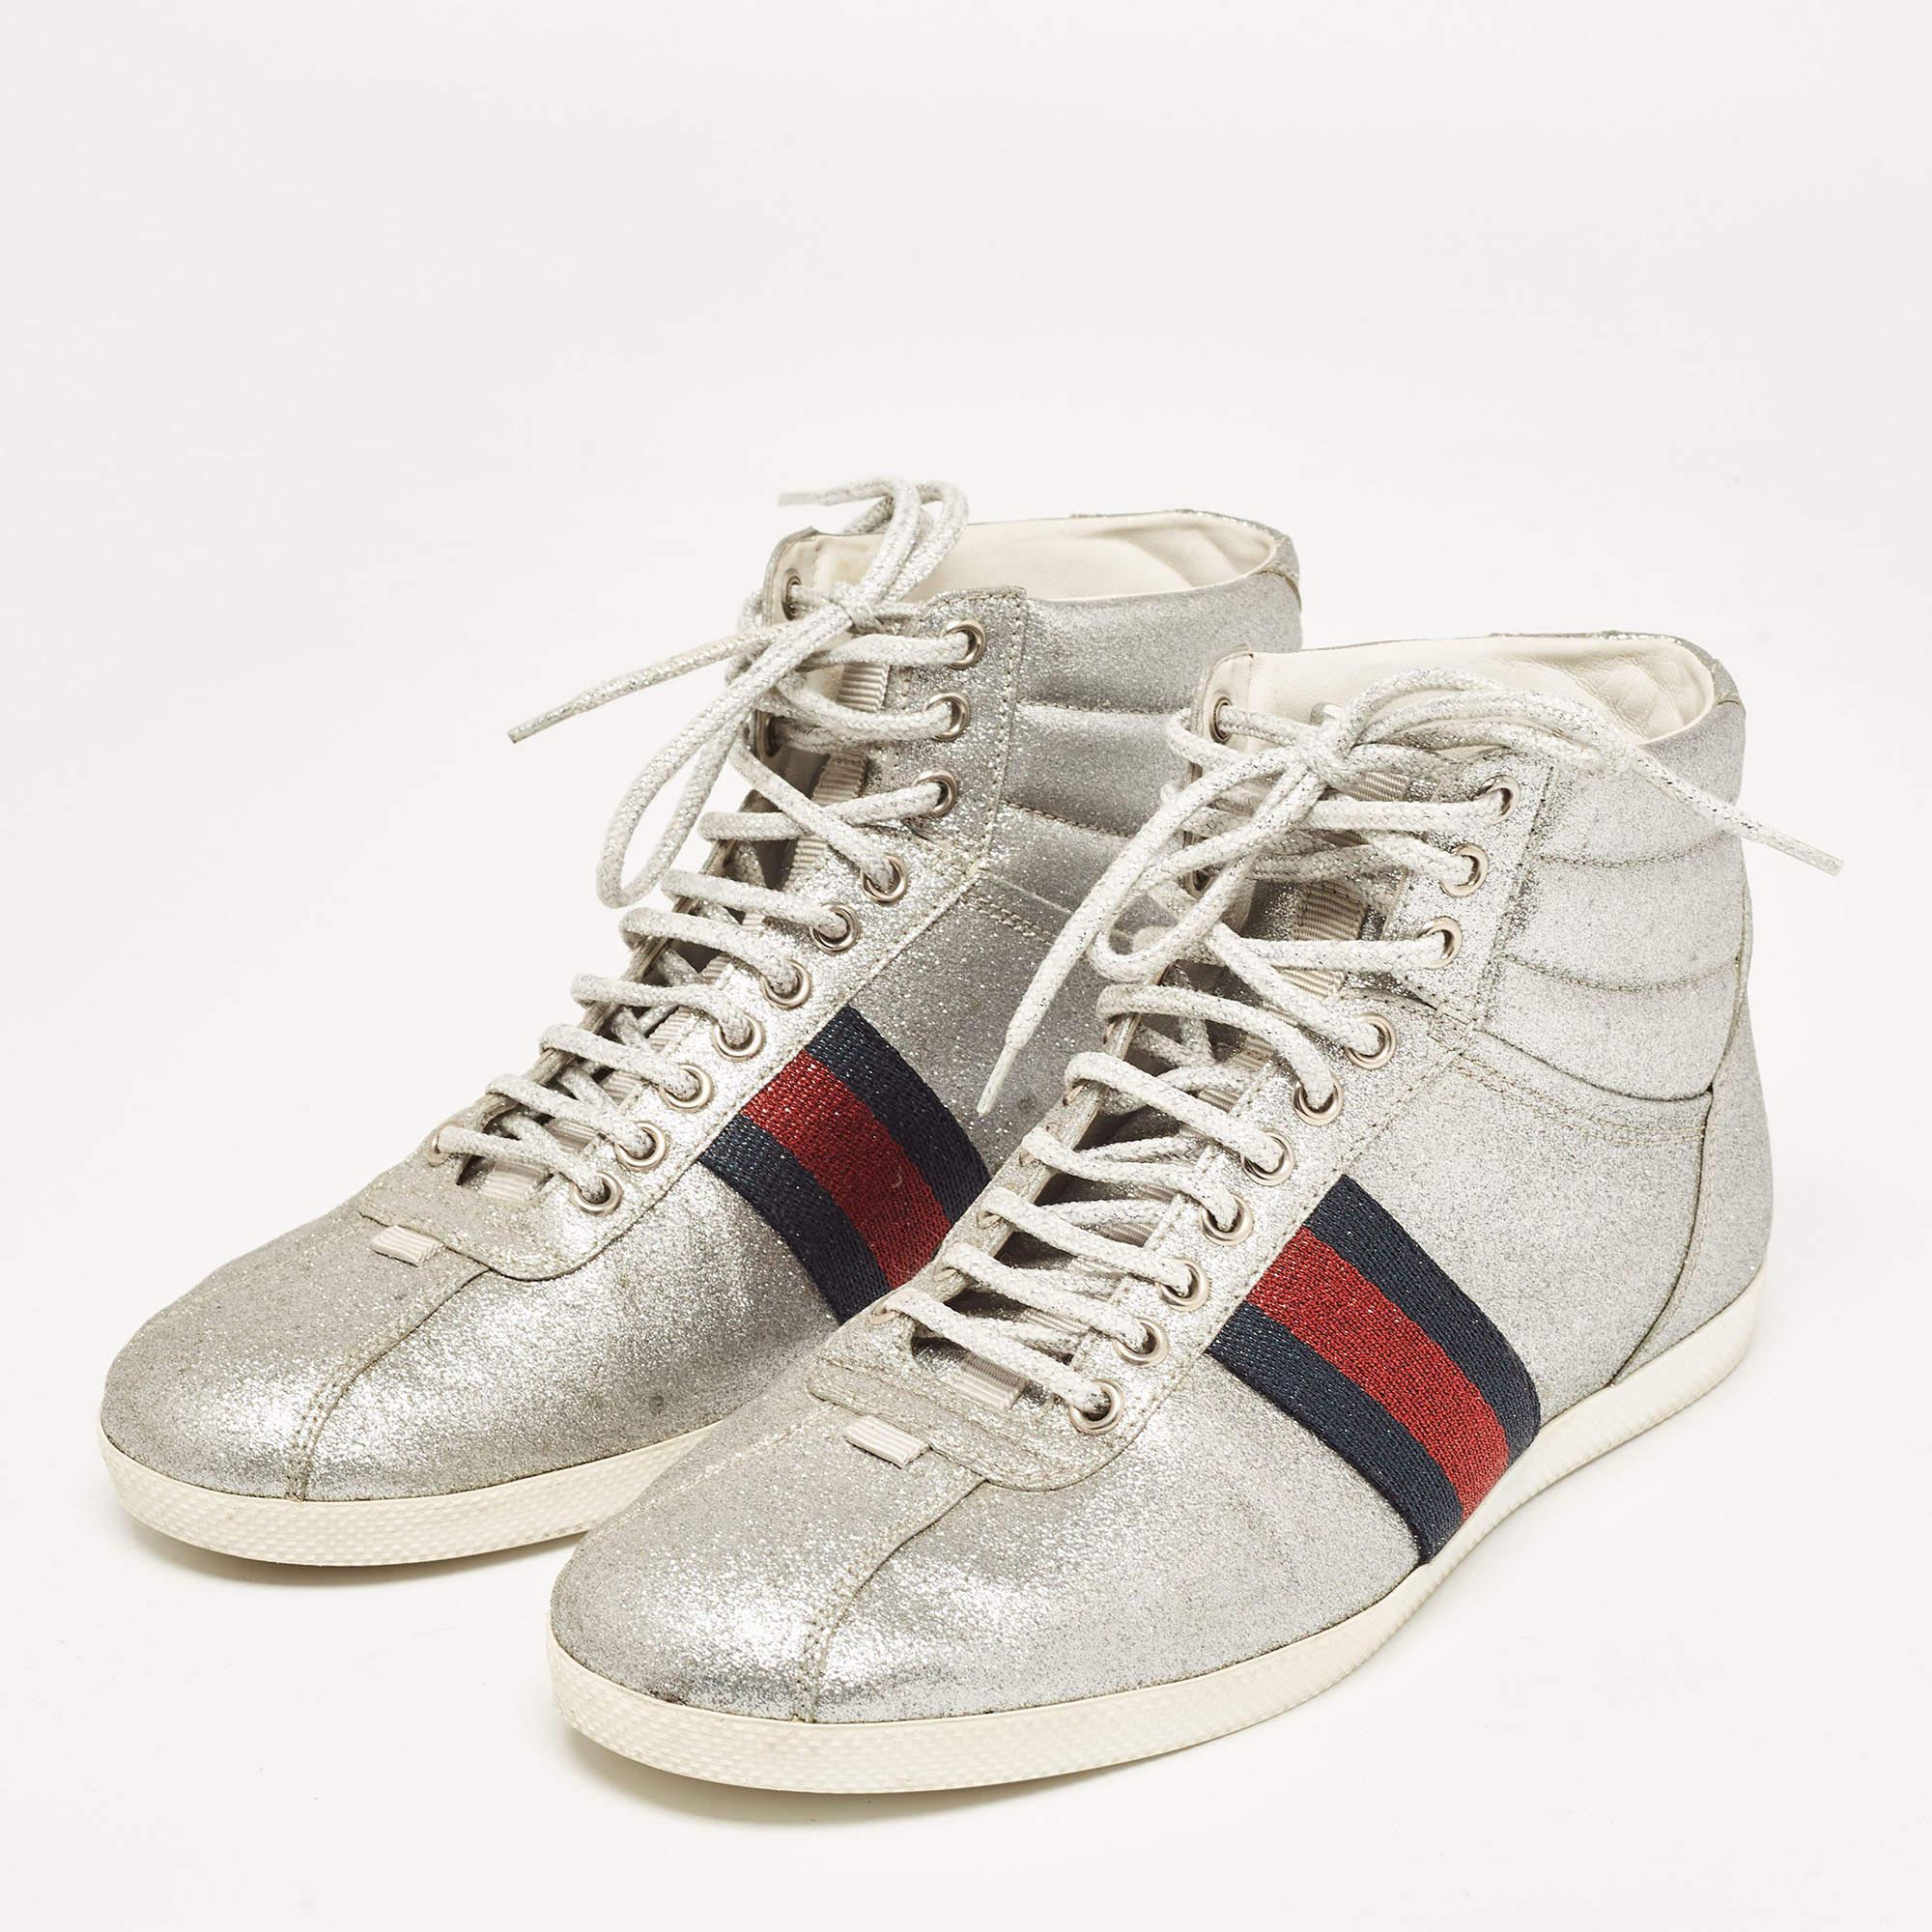 Packed with style and comfort, these Gucci sneakers are gentle on the feet so that you can glide through the day. They have a sleek upper with lace closure, and they're set on durable rubber soles.

Includes: Original Dustbag, Original Box